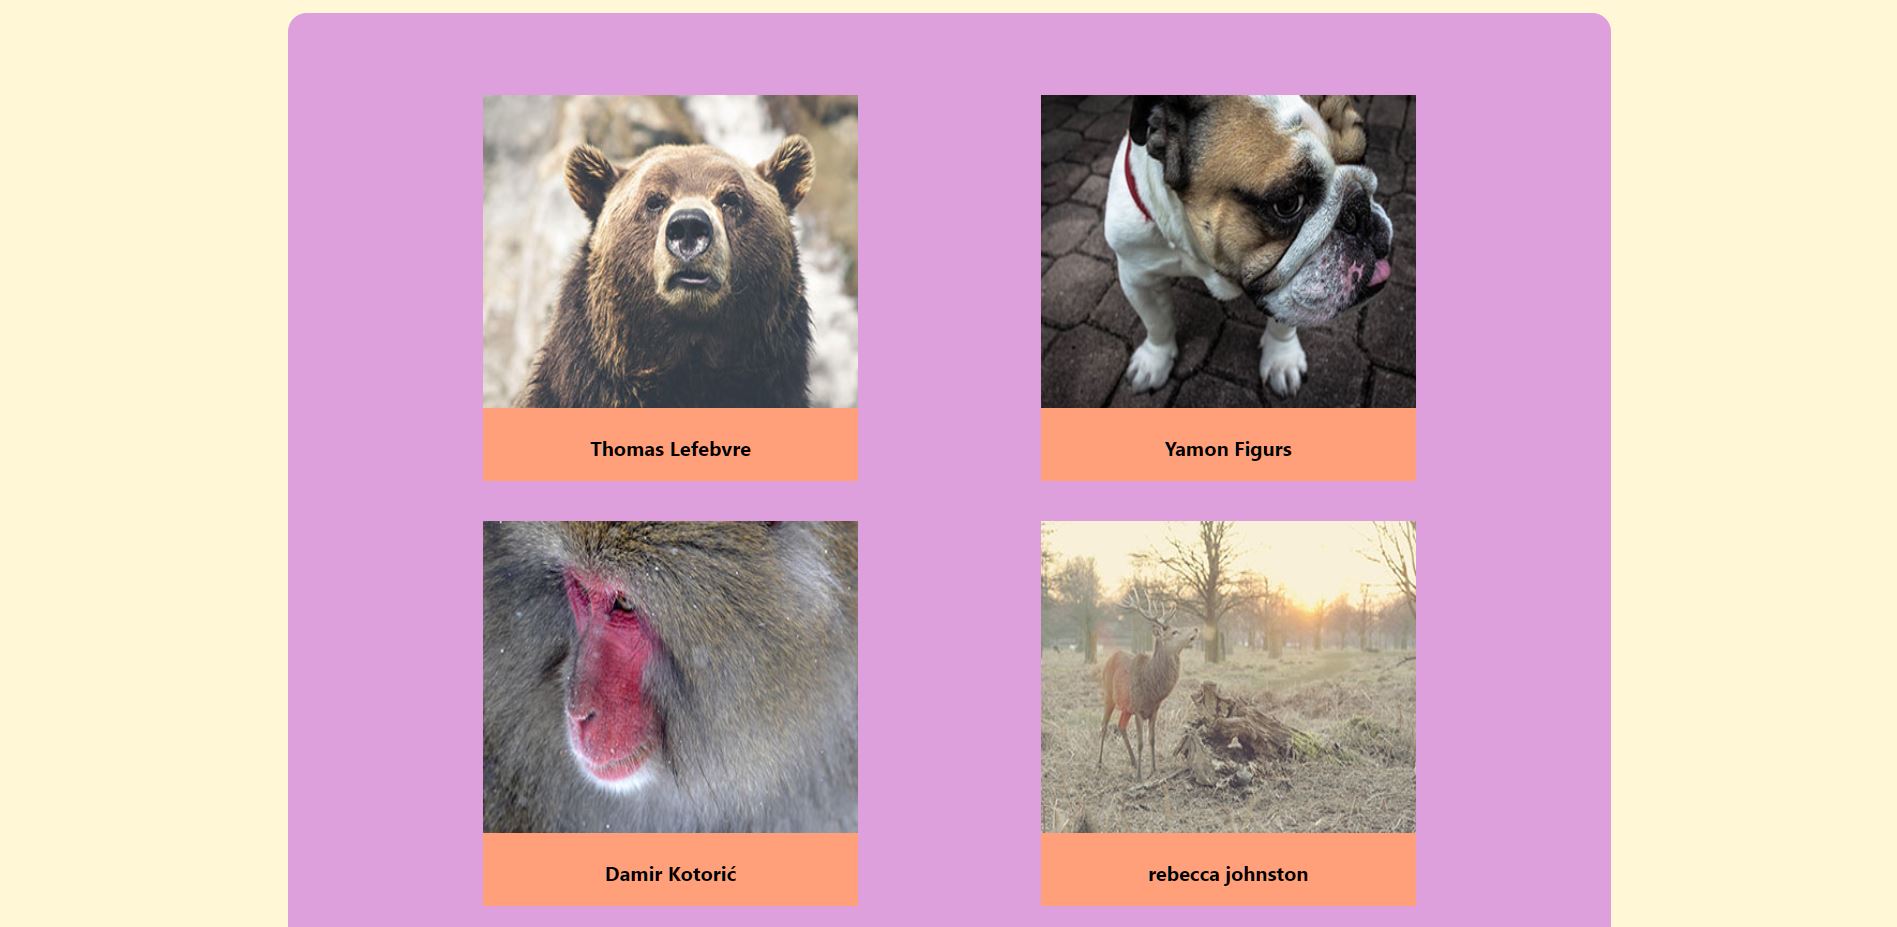 Preview still image of a photo gallery, containing placeholder images of animals.